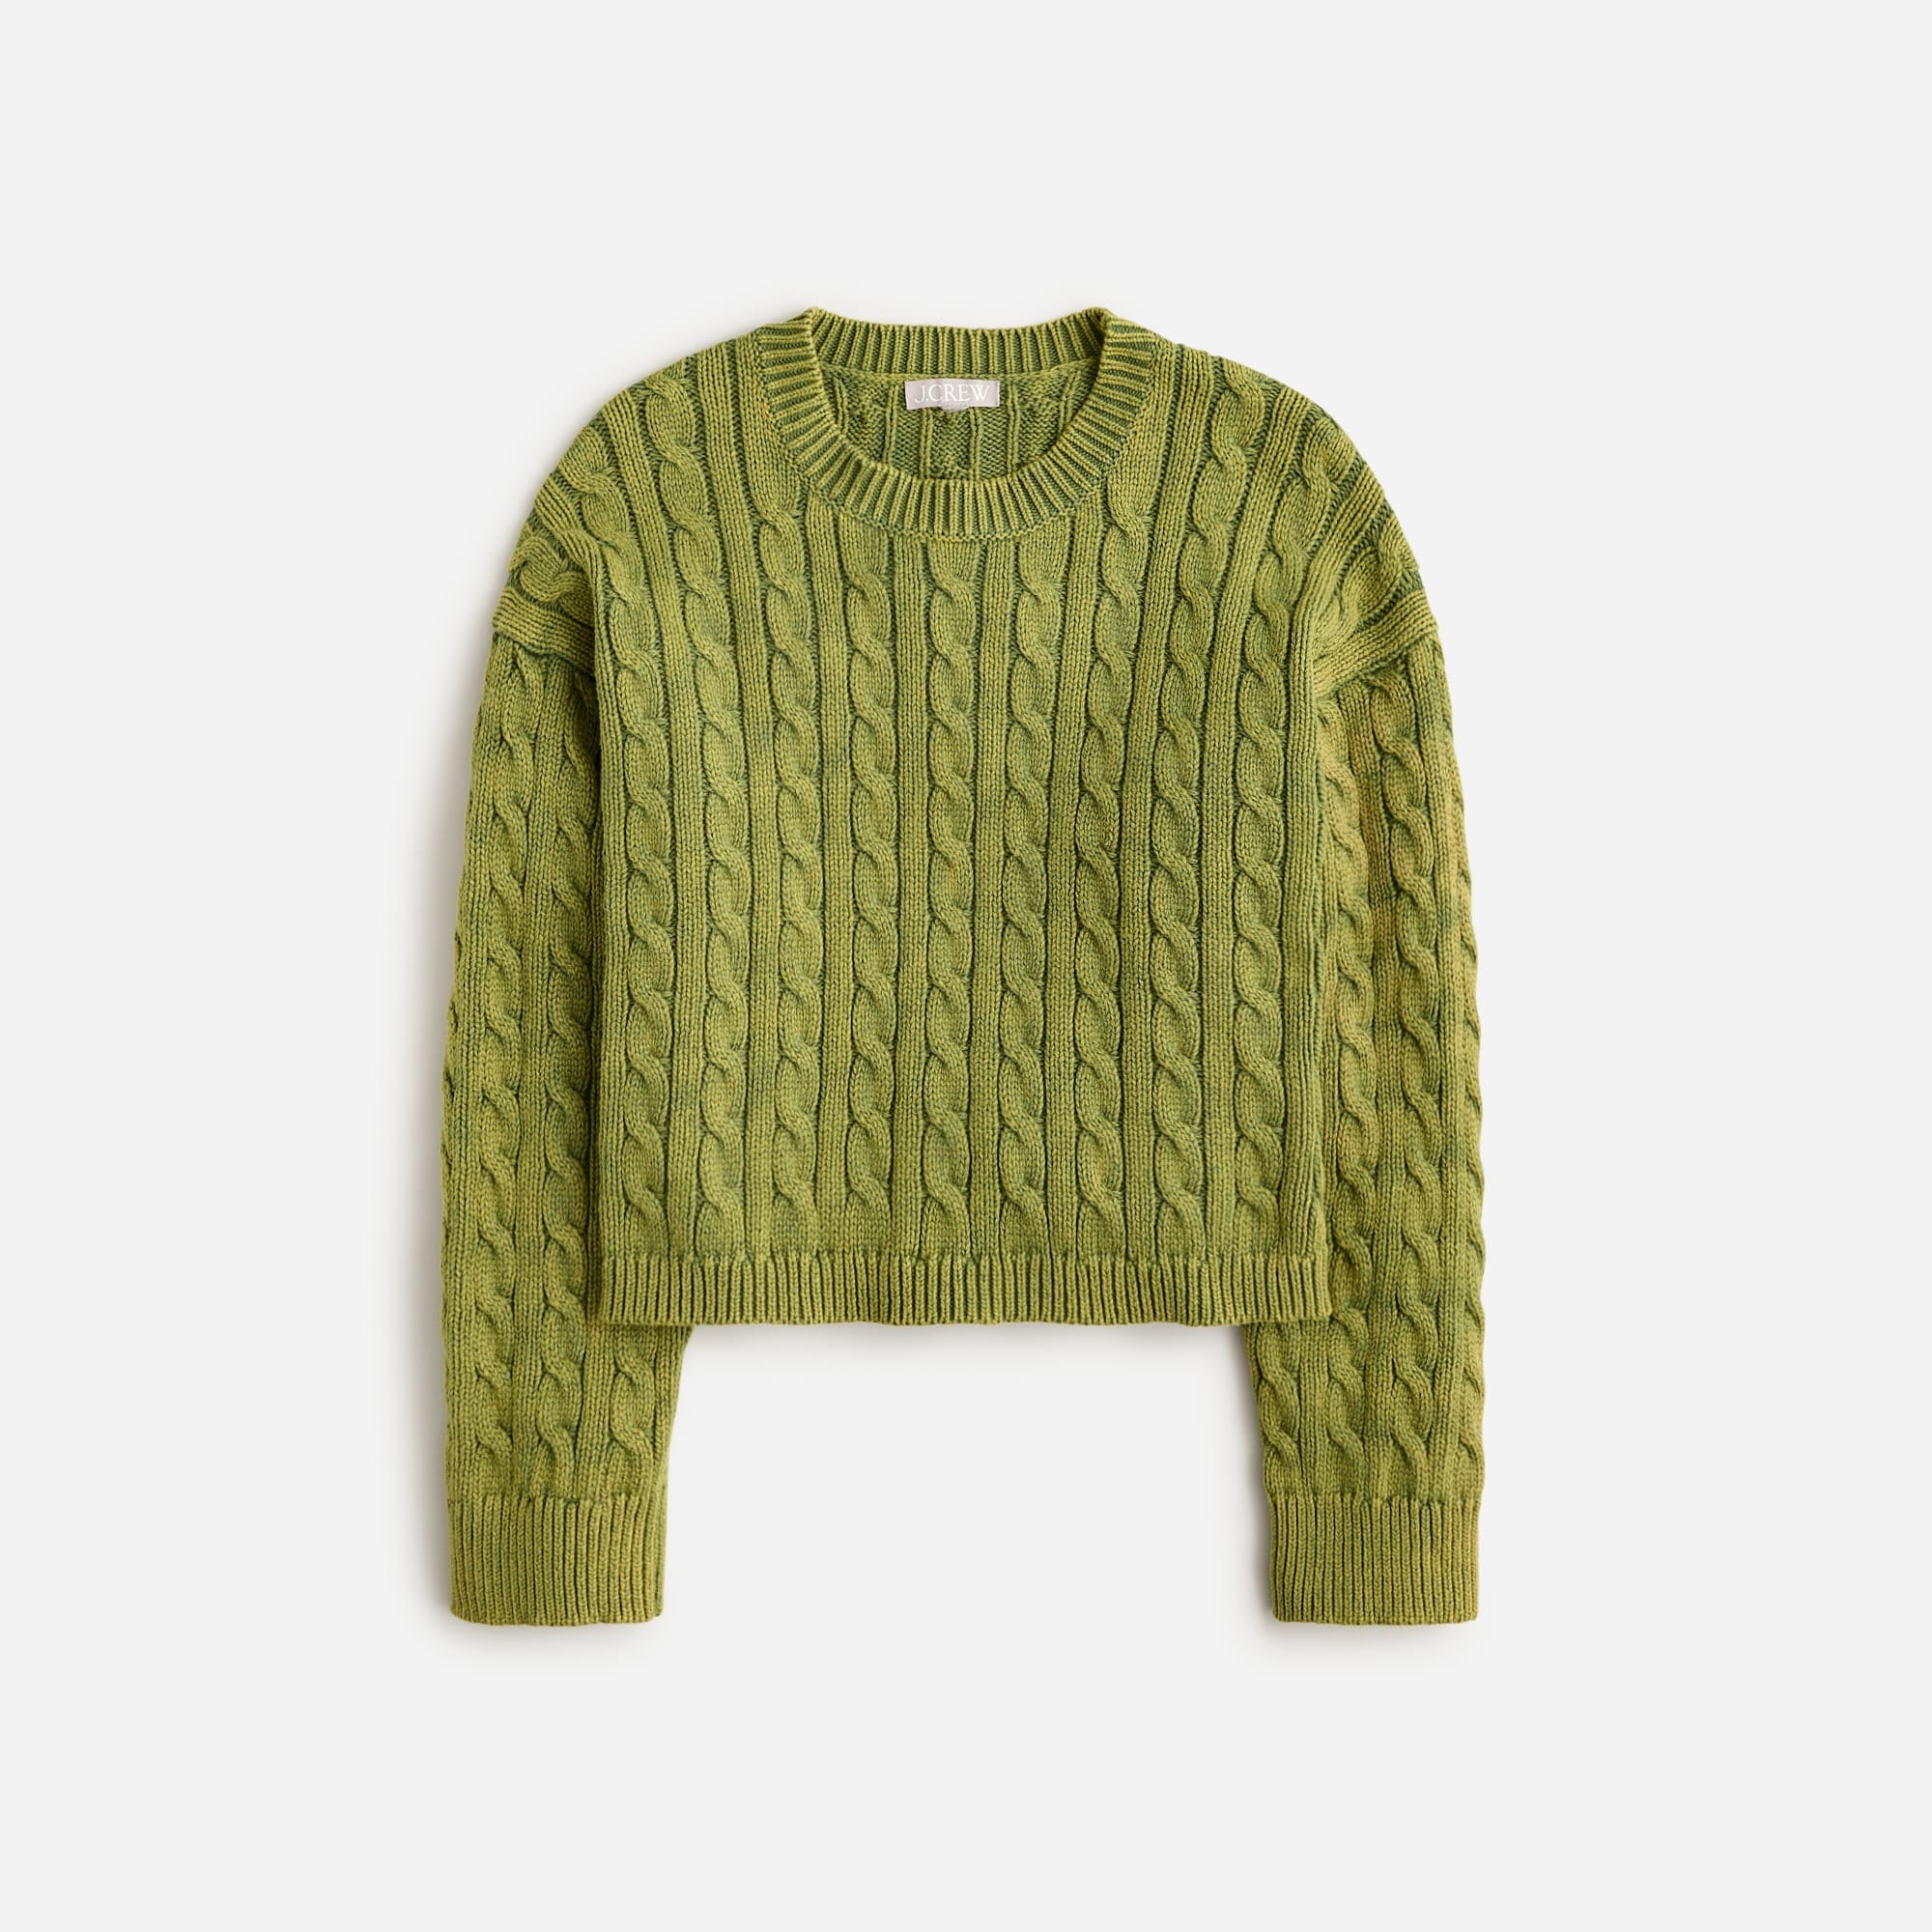  Cable-knit cropped crewneck sweater